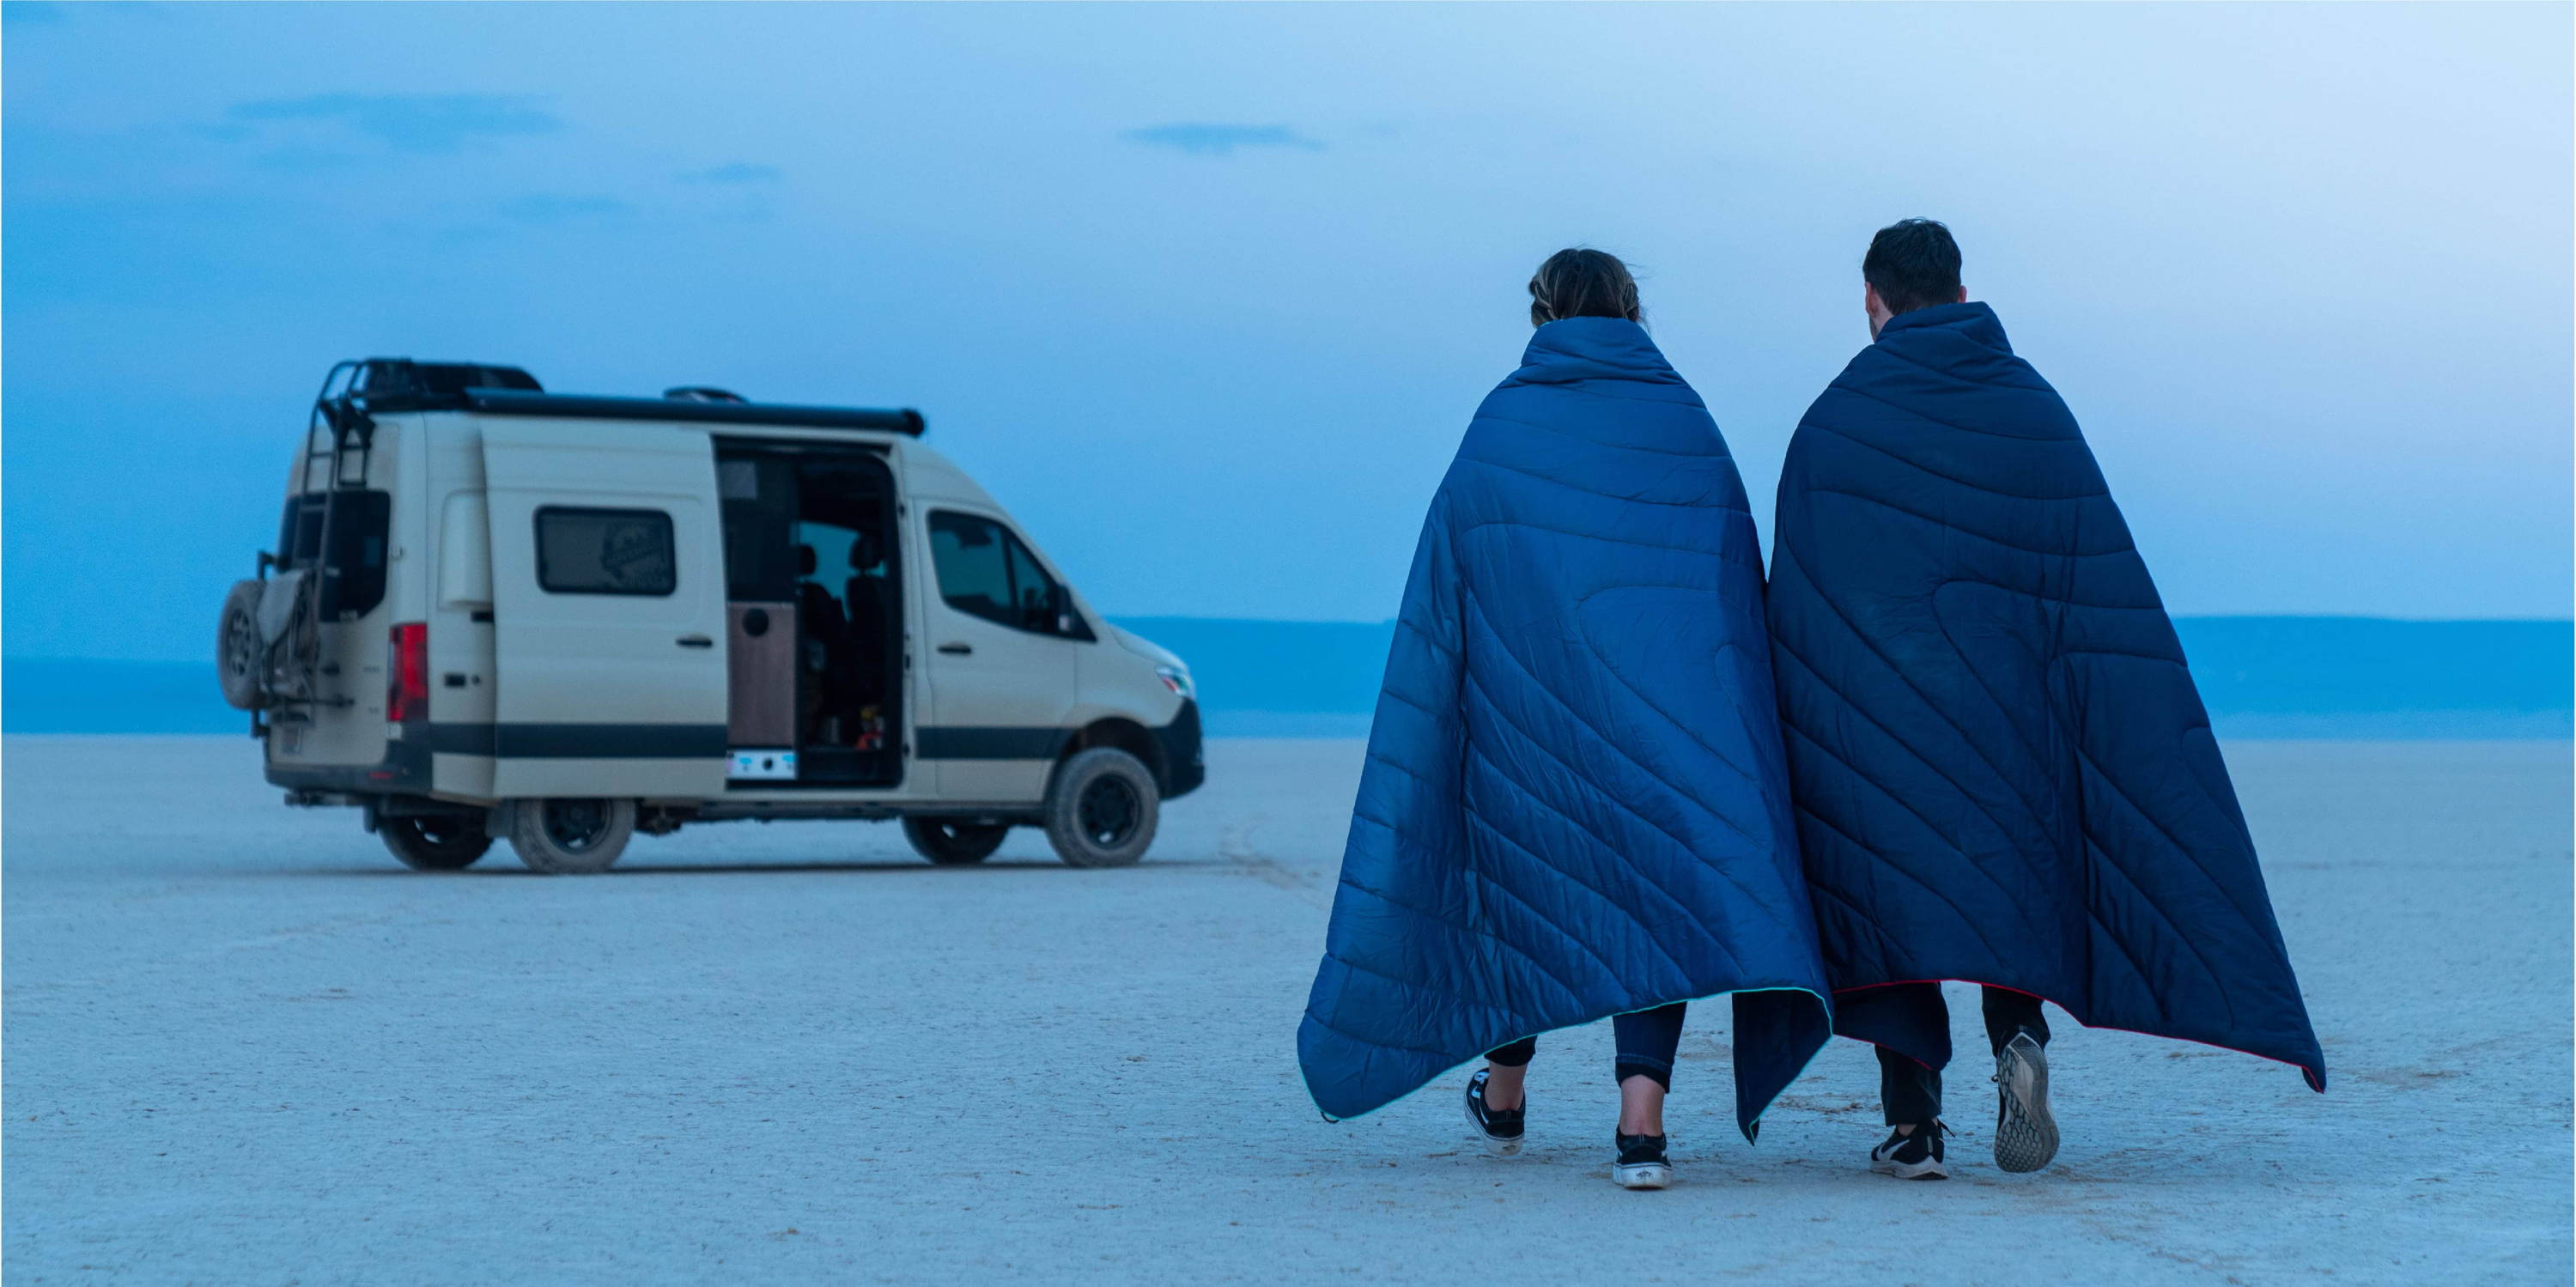 Man and Woman Walking Through Desert Towards Camper Van While Wrapped In Original Puffy Blankets